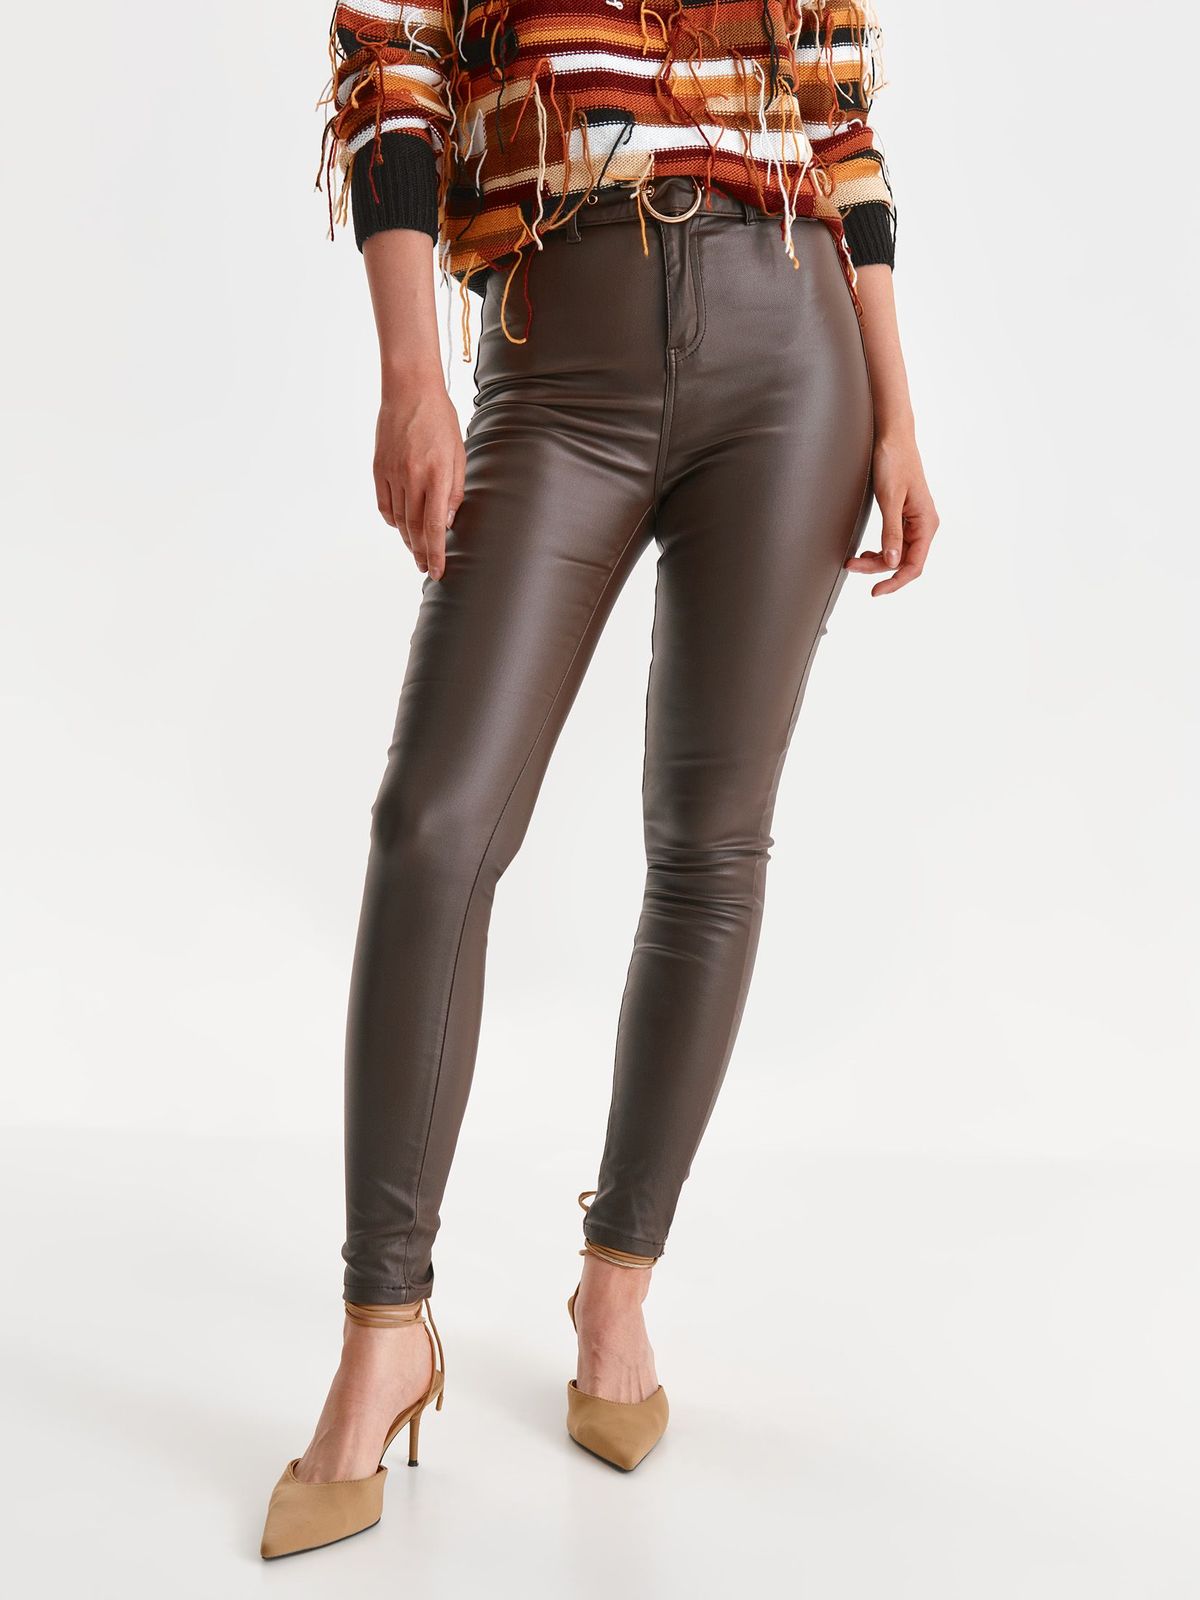 Brown trousers from ecological leather conical long